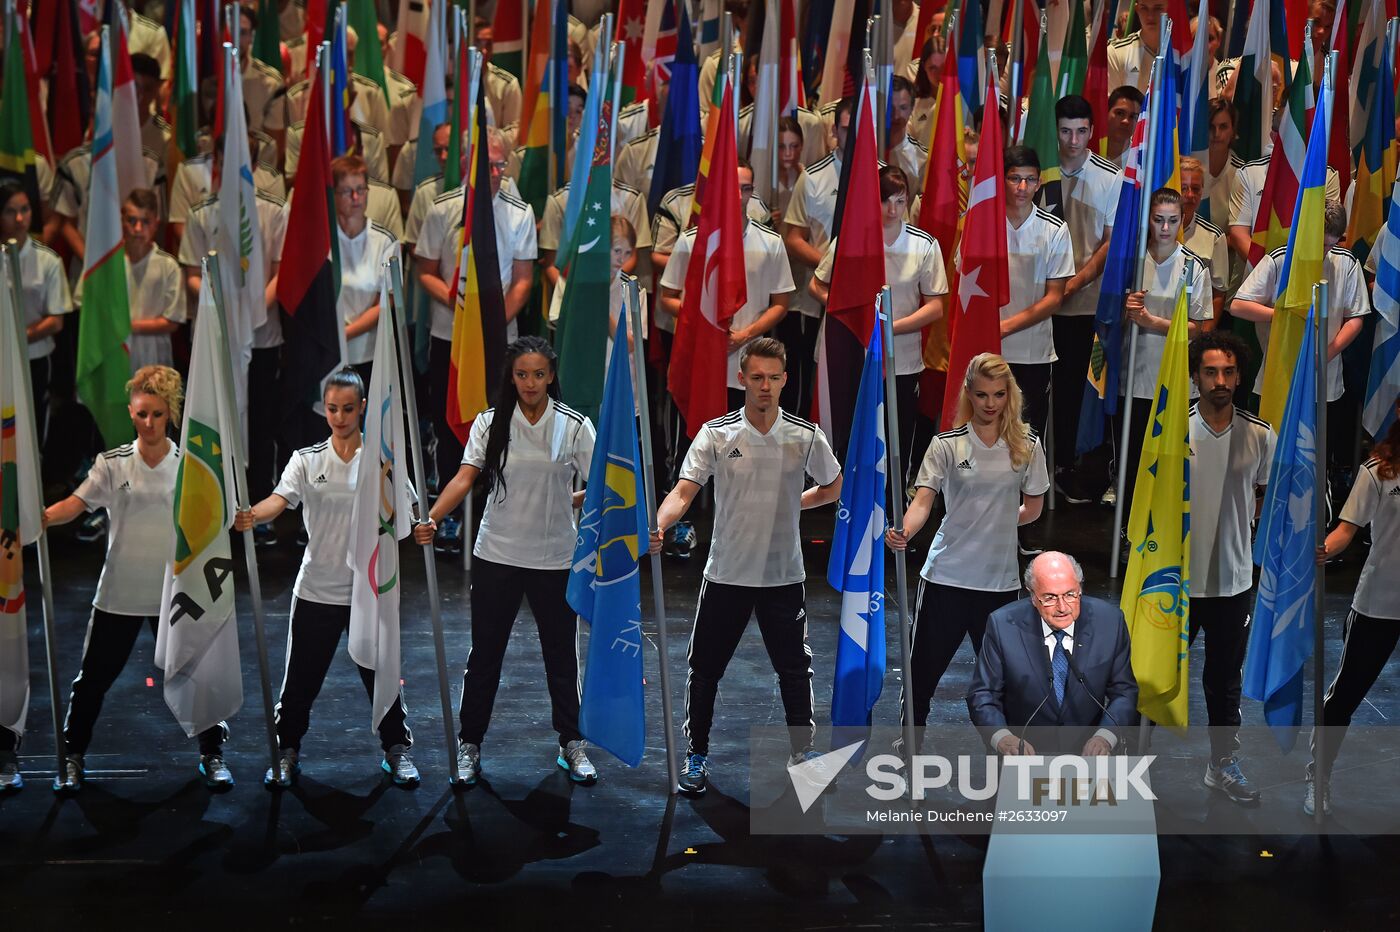 65th FIFA Congress opening ceremony